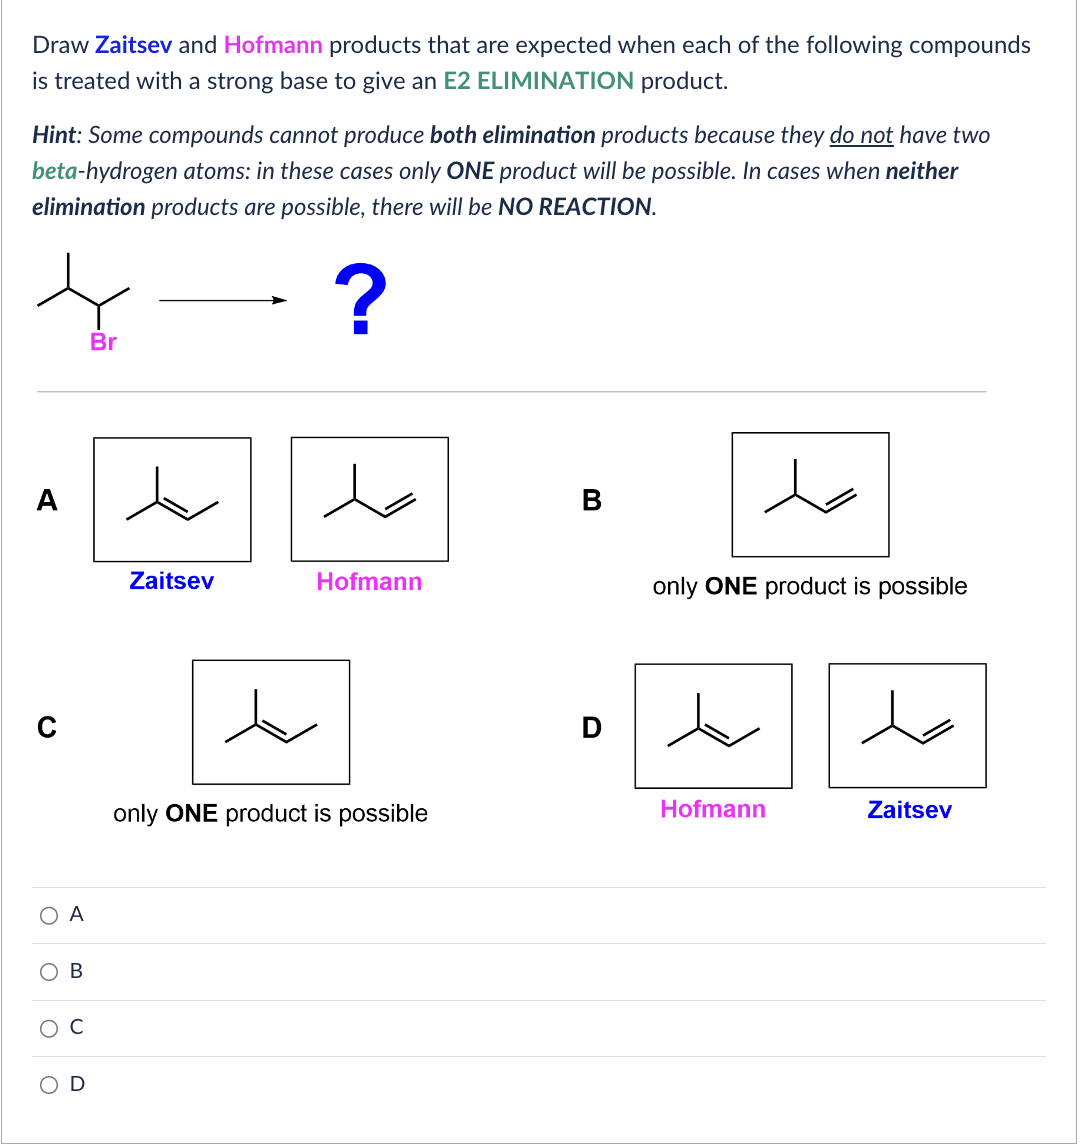 Draw Zaitsev and Hofmann products that are expected when each of the following compounds
is treated with a strong base to give an E2 ELIMINATION product.
Hint: Some compounds cannot produce both elimination products because they do not have two
beta-hydrogen atoms: in these cases only ONE product will be possible. In cases when neither
elimination products are possible, there will be NO REACTION.
?
O A
O
O
O
B
U
Br
t
Zaitsev
Hofmann
only ONE product is possible
B
only ONE product is possible
Hofmann
Zaitsev